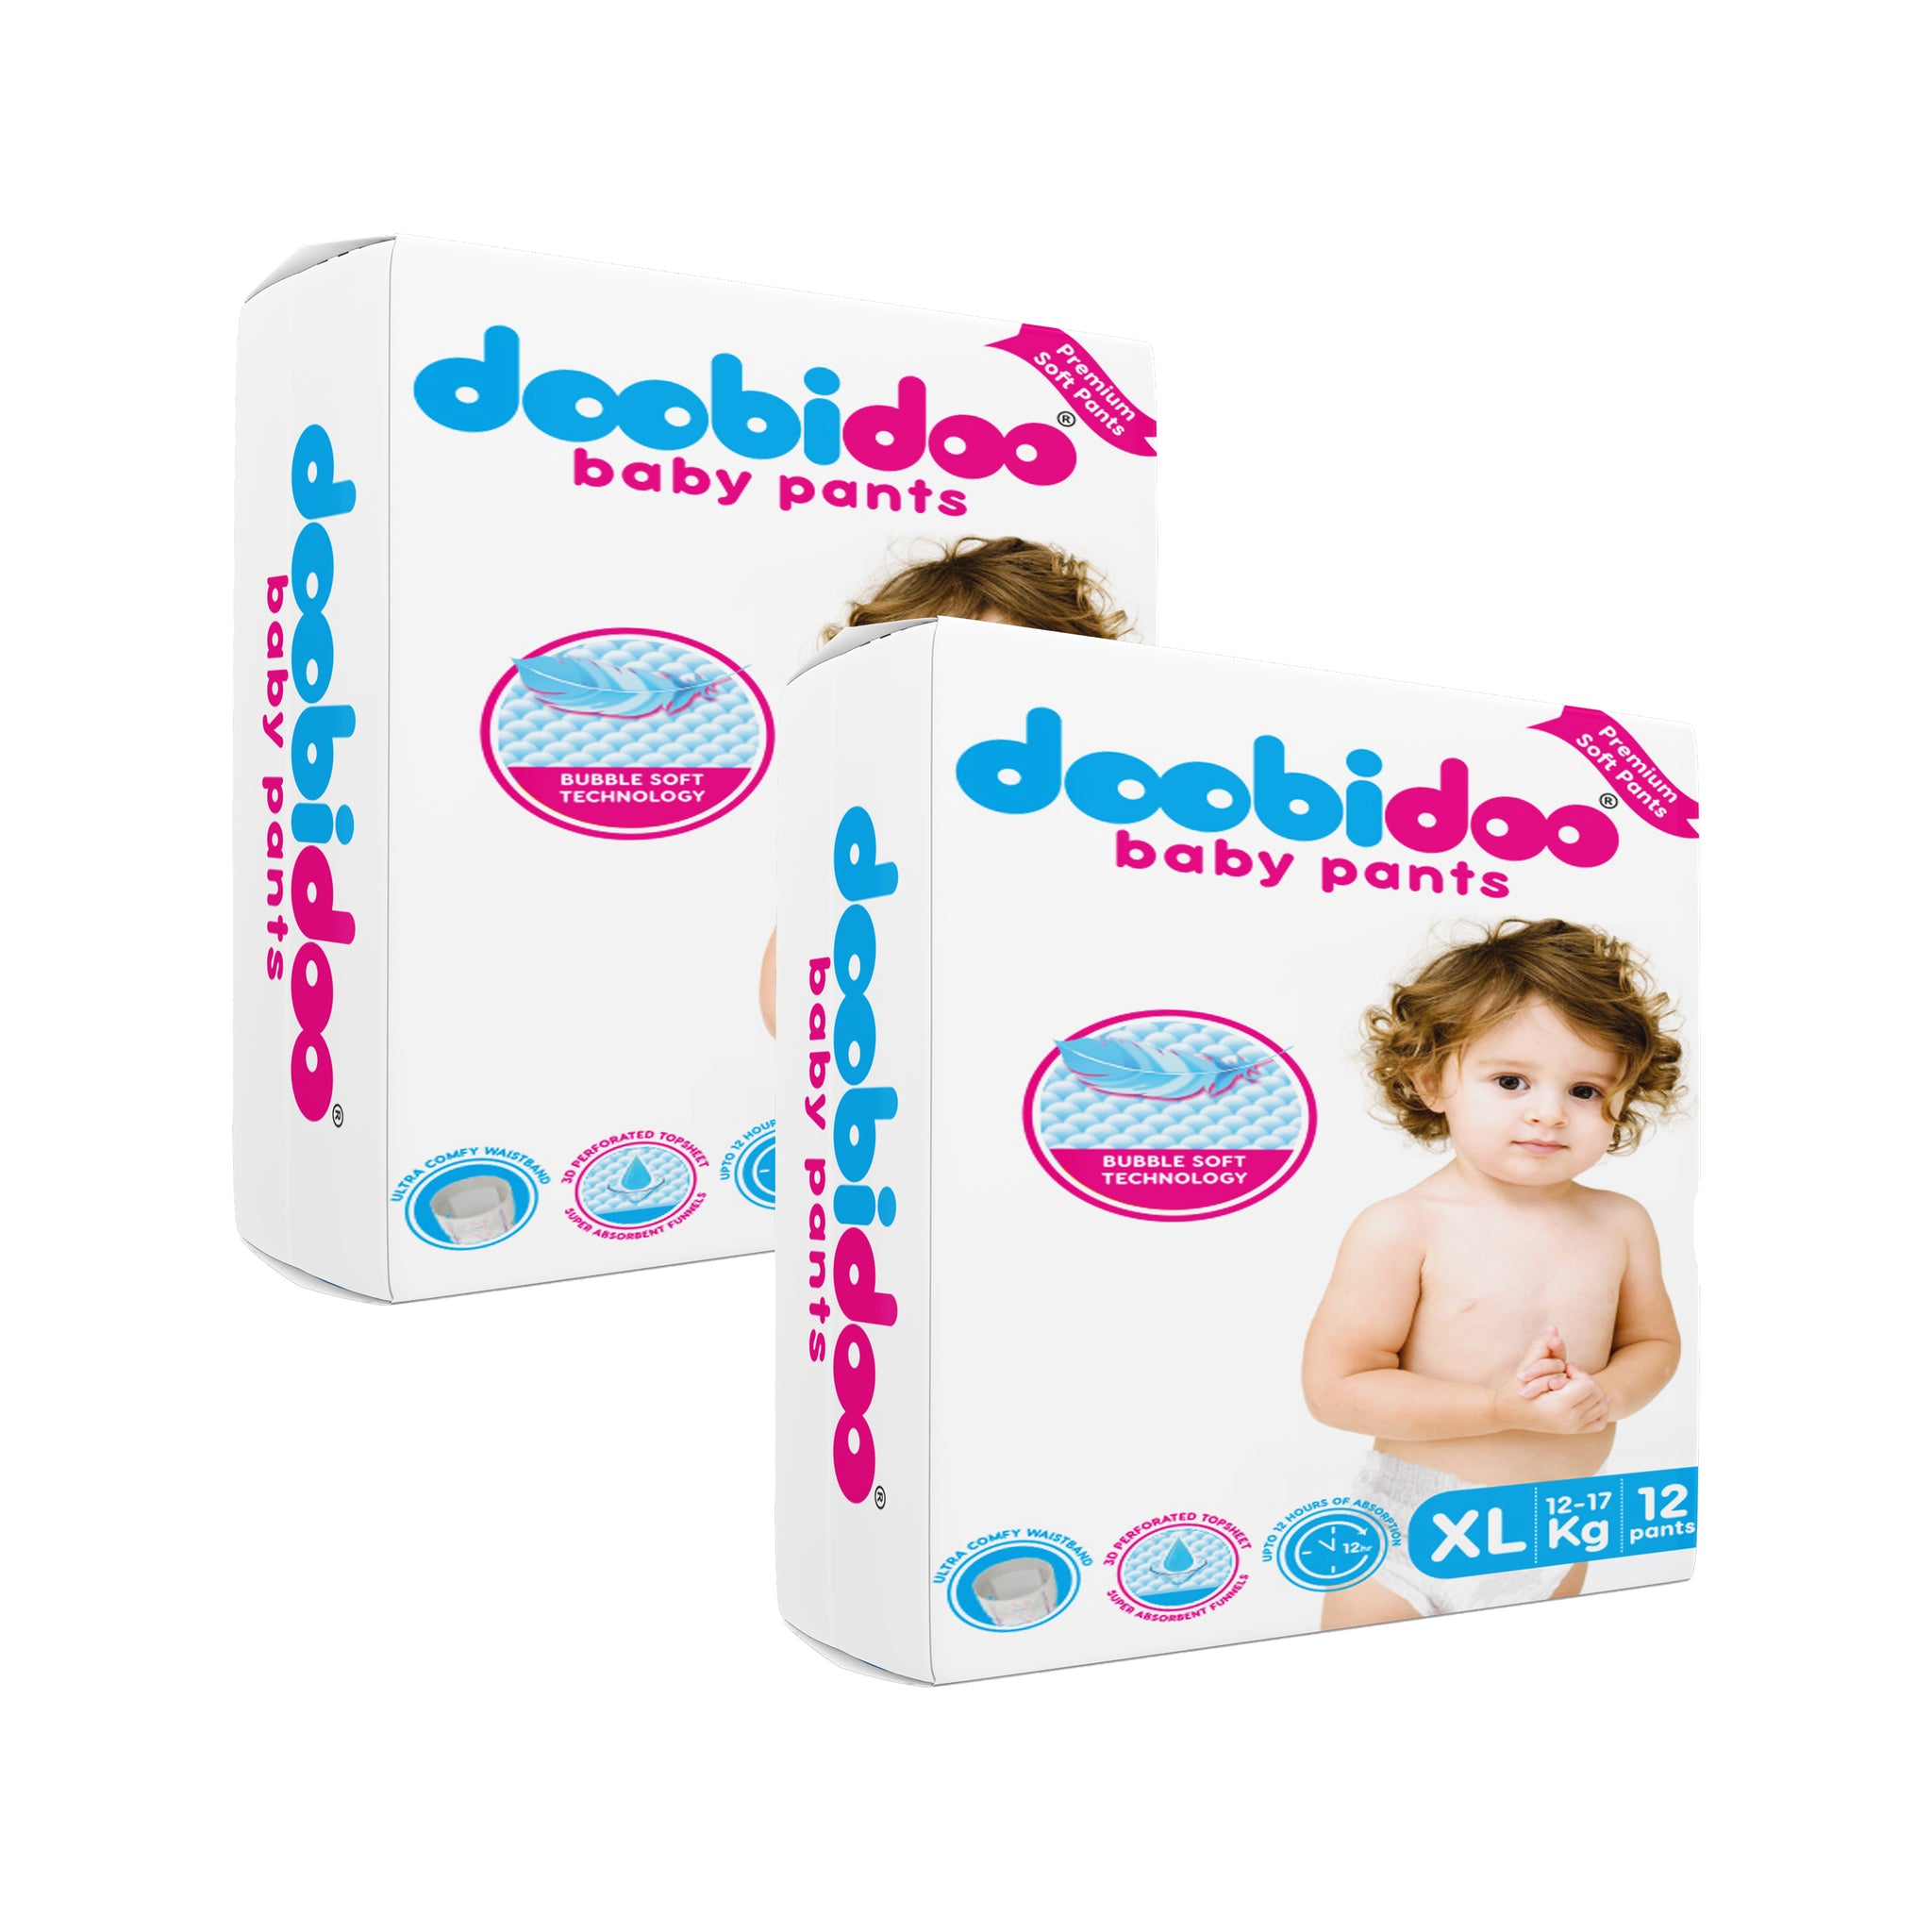 Doobidoo Baby Pants Diapers - XL Size (24 Count) - All Round Softness with Bubble soft Top sheet (12-17 kgs)